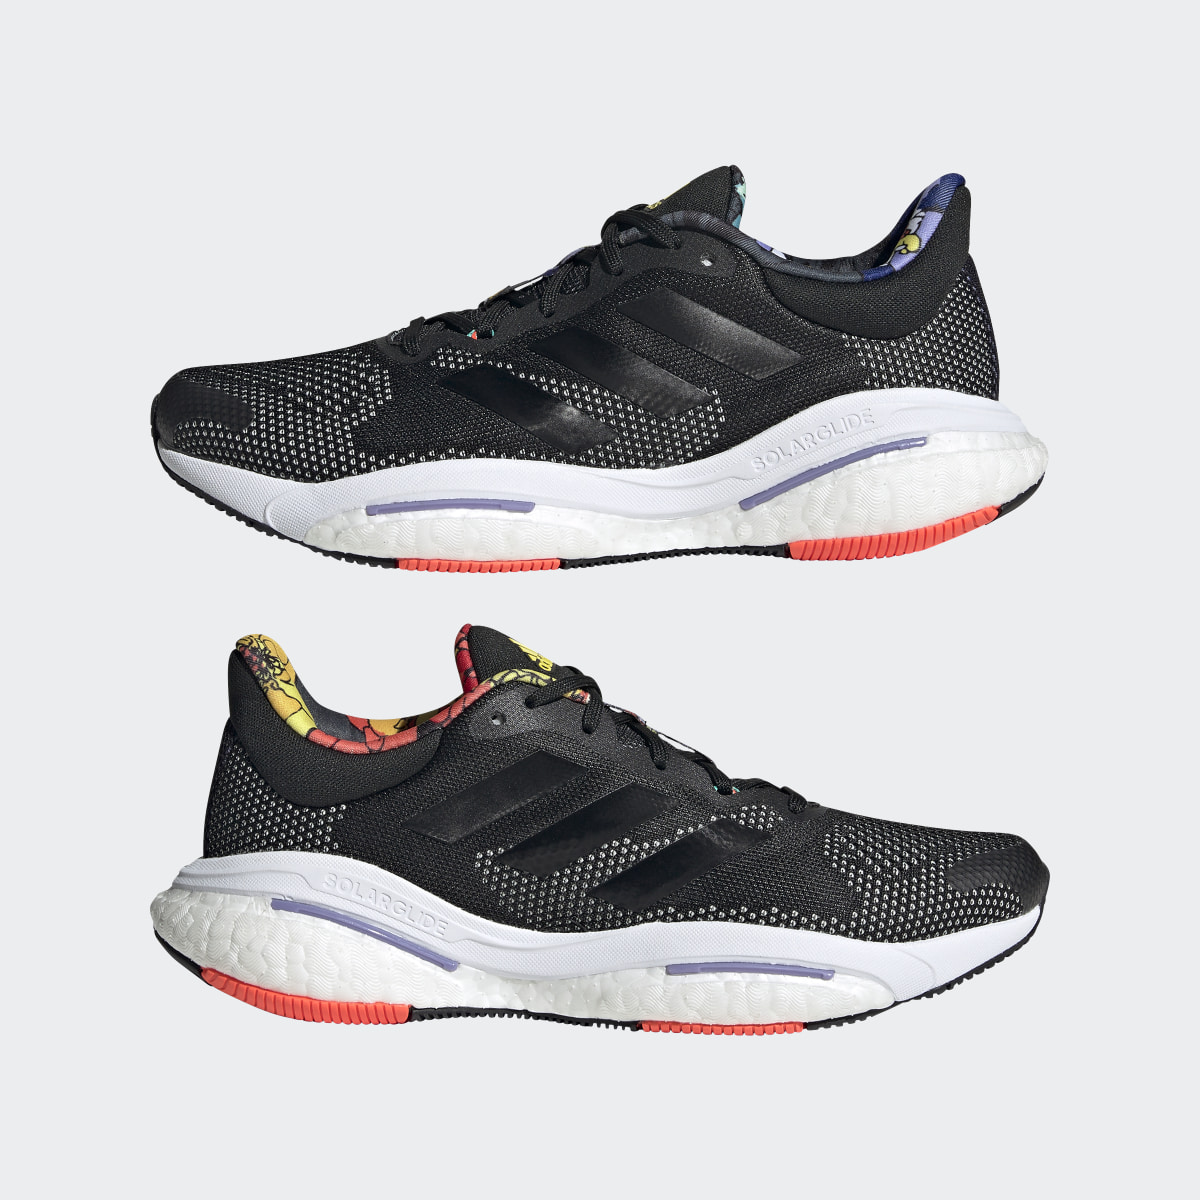 Adidas Solarglide 5 Shoes. 8